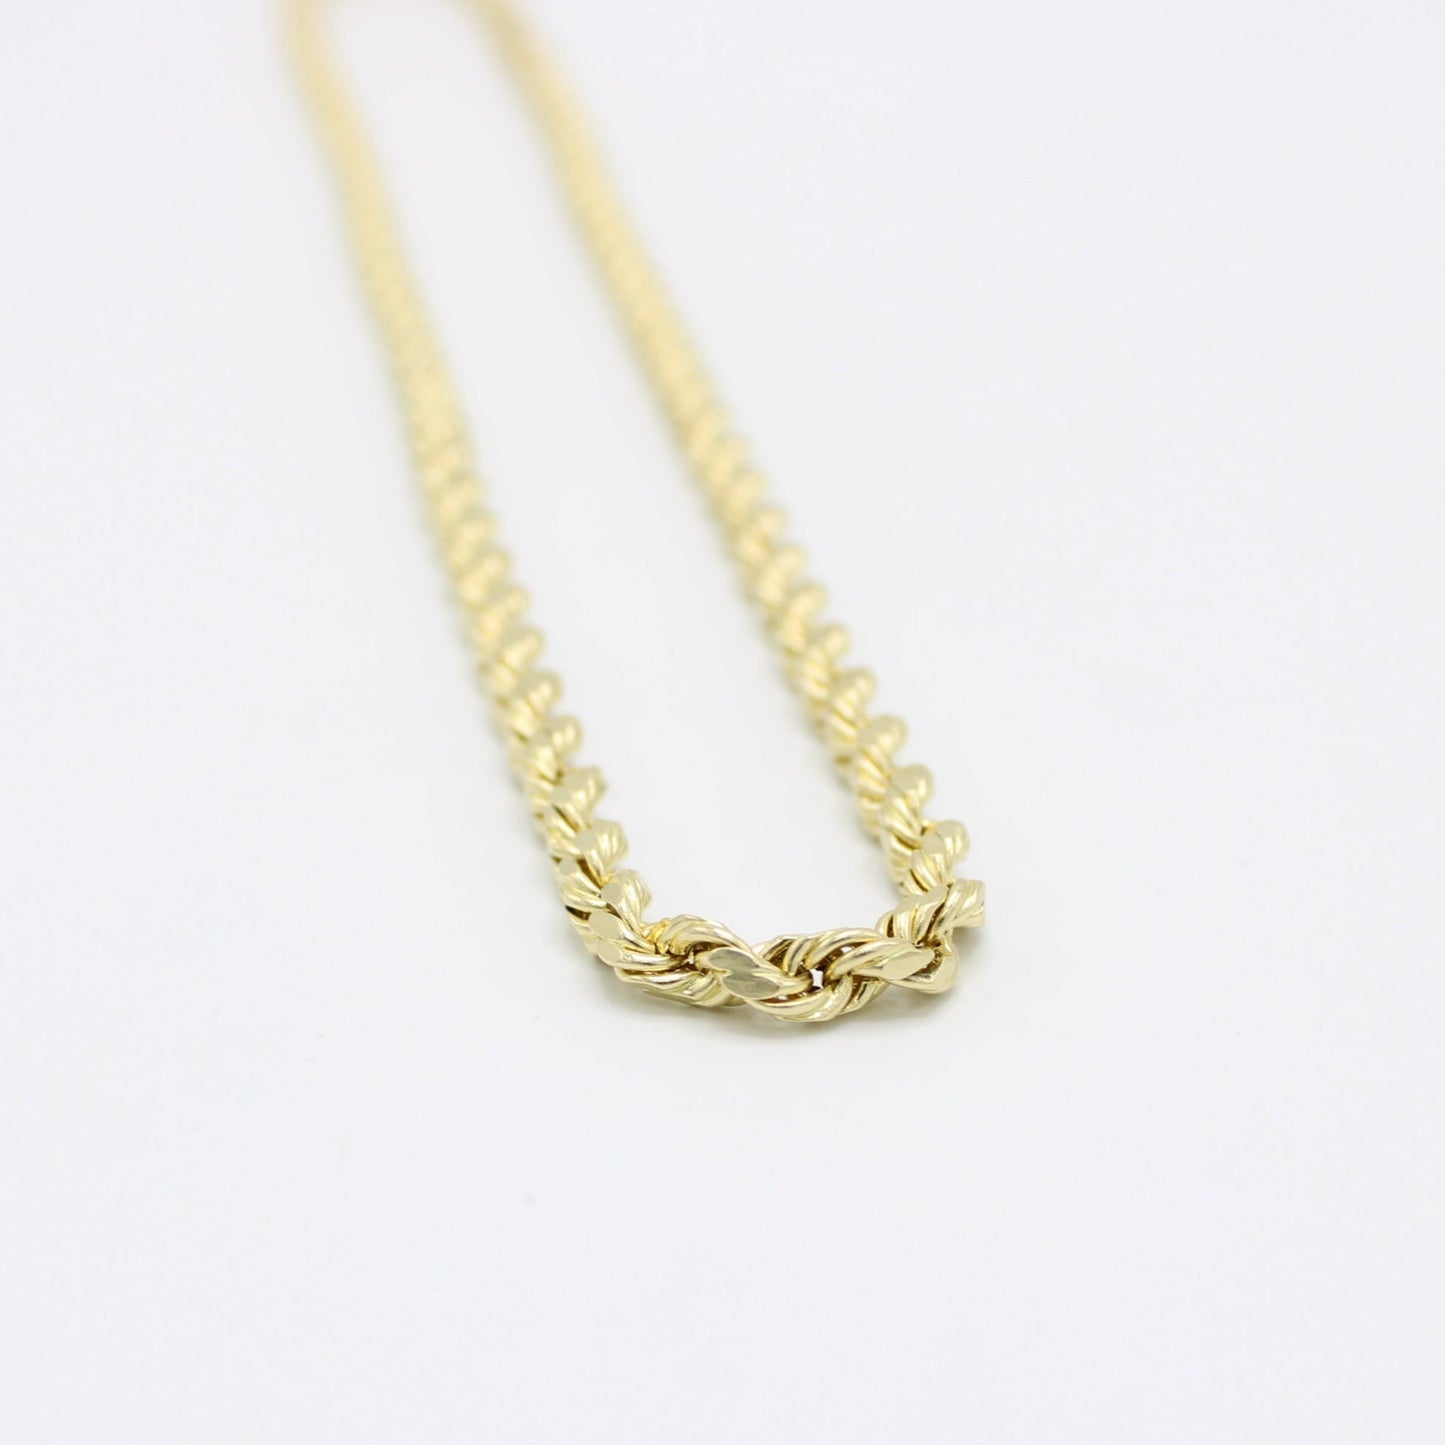 10k Yellow Gold Hollow Rope Chain 4.5 mm